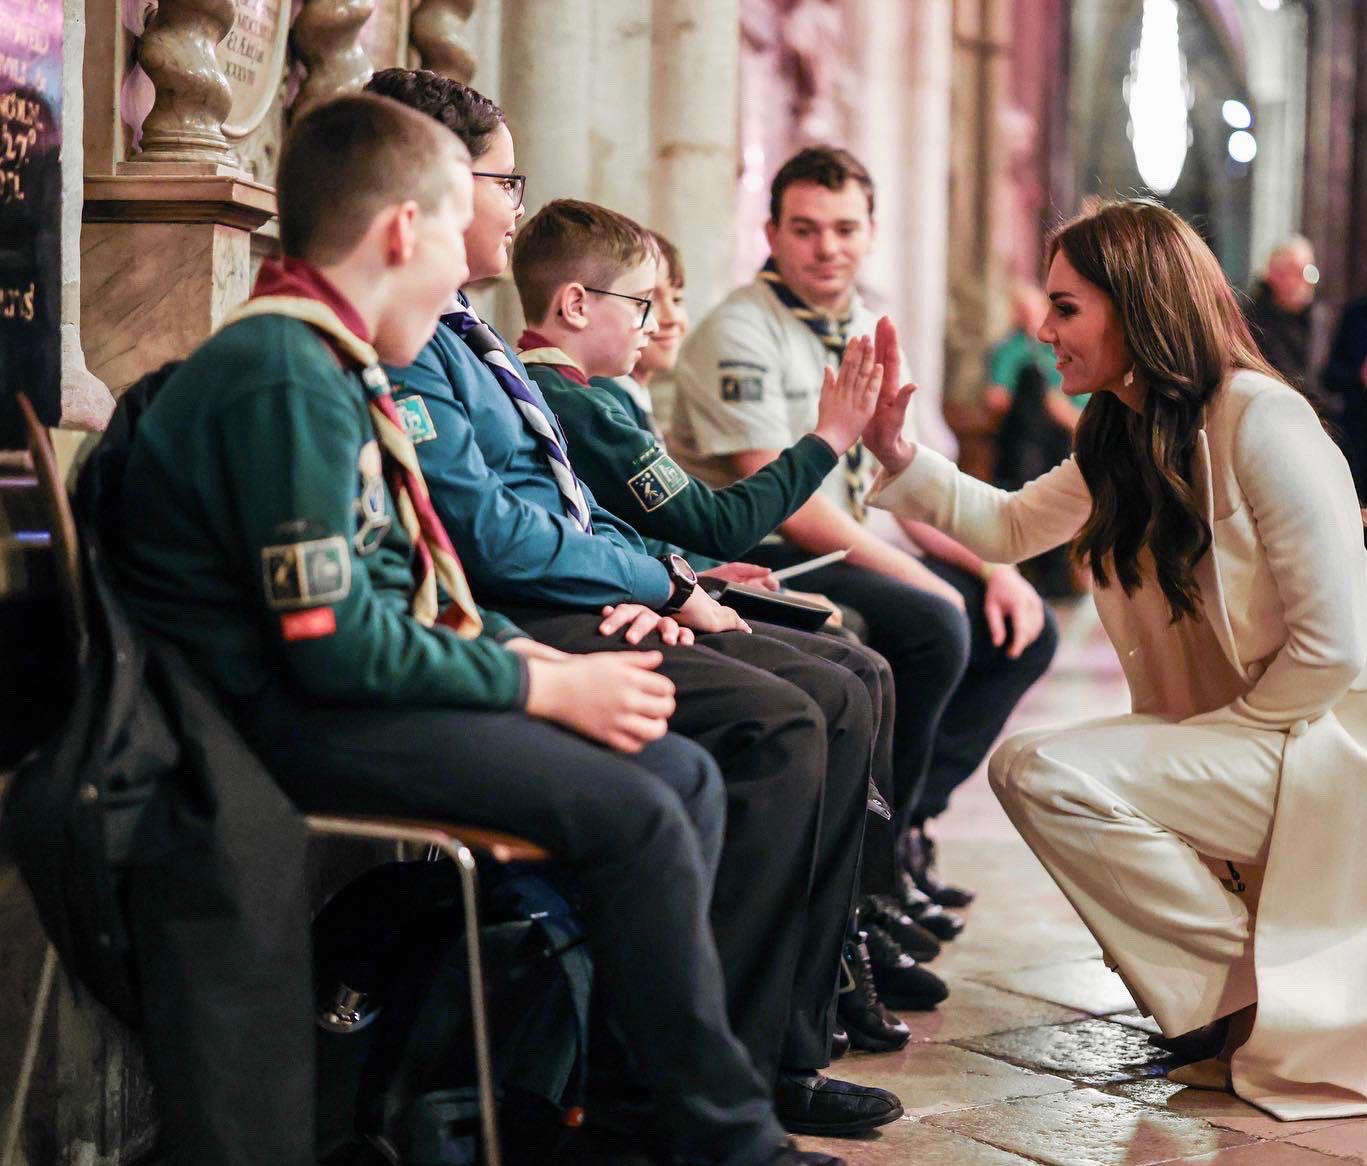 Three Cubs and a volunteer uniform and neckers are sat next to each other to the left of the image, with one Cub holding his hand out to the meet the hand of HRH Princess of Wales, who's crouching down and facing the Cubs. They're inside Westminster Abbey.